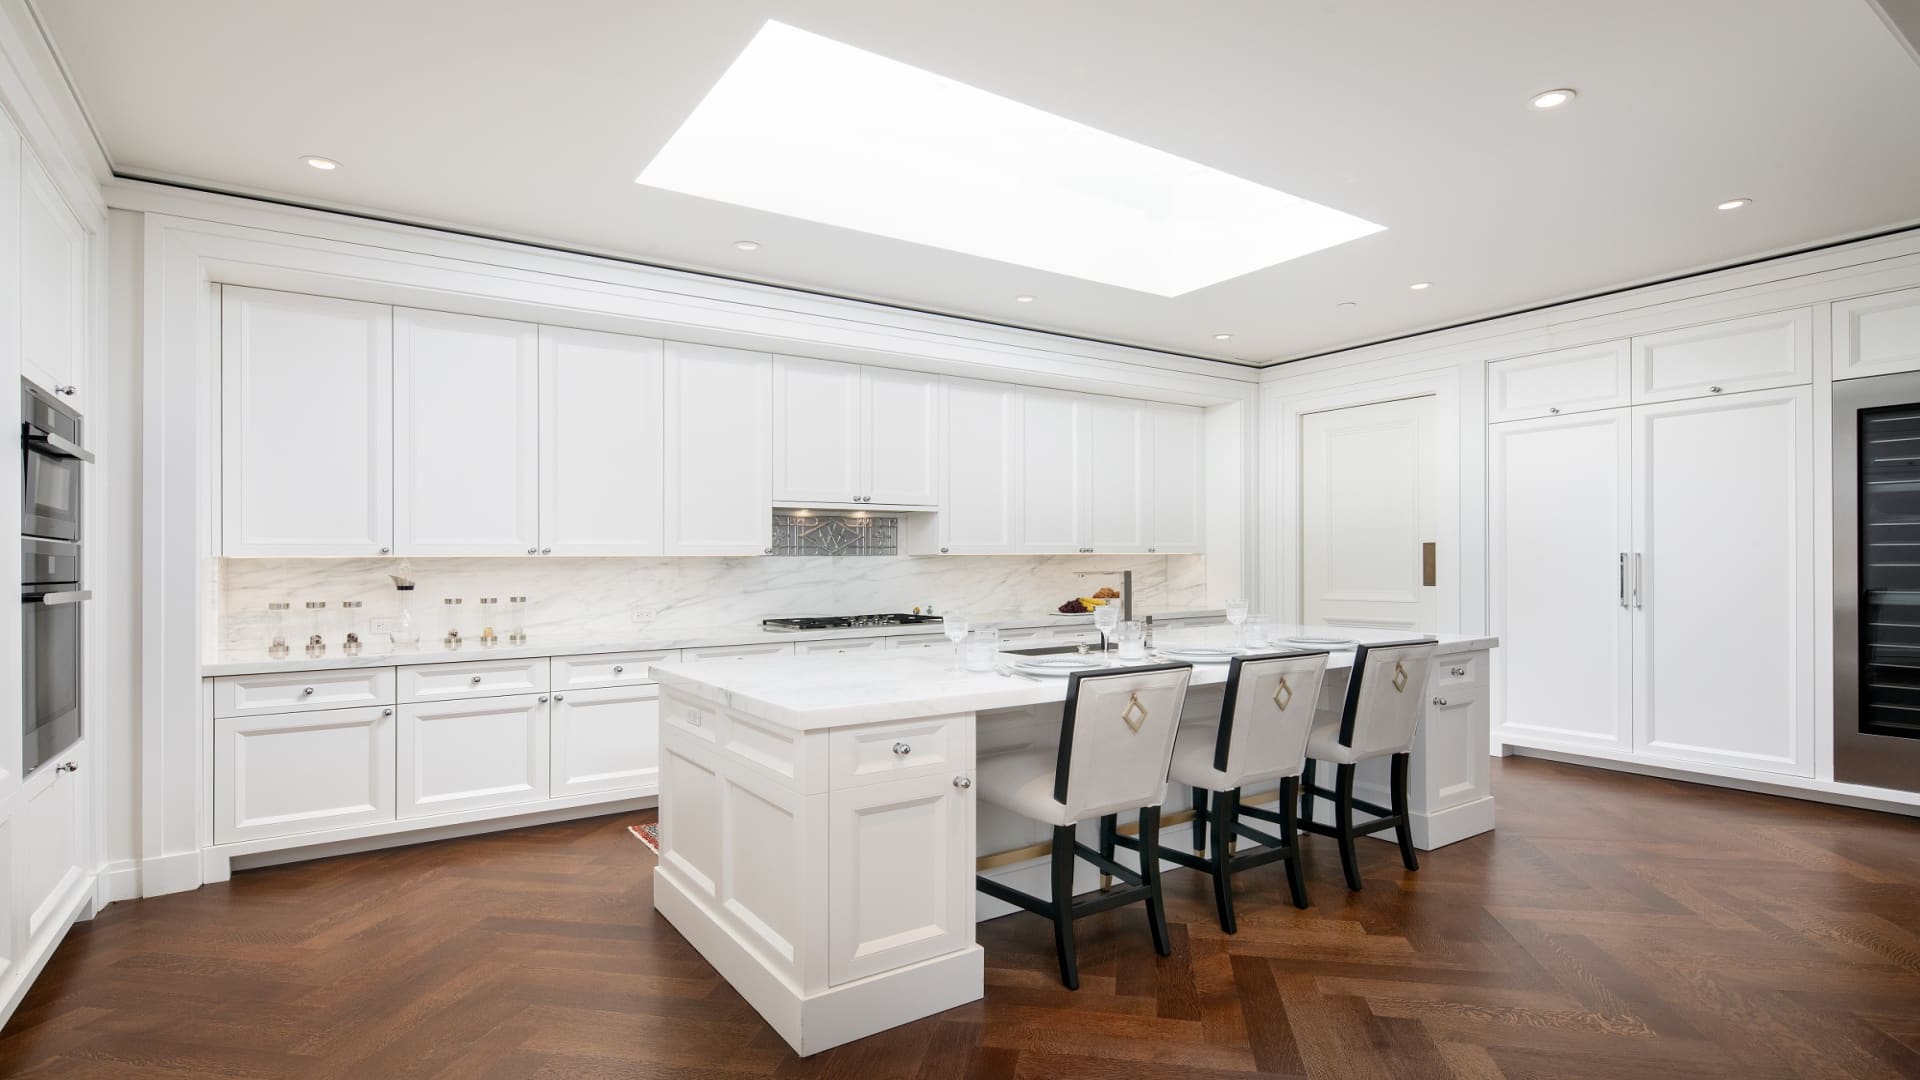 The open kitchen, with marble countertops and luxury appliances